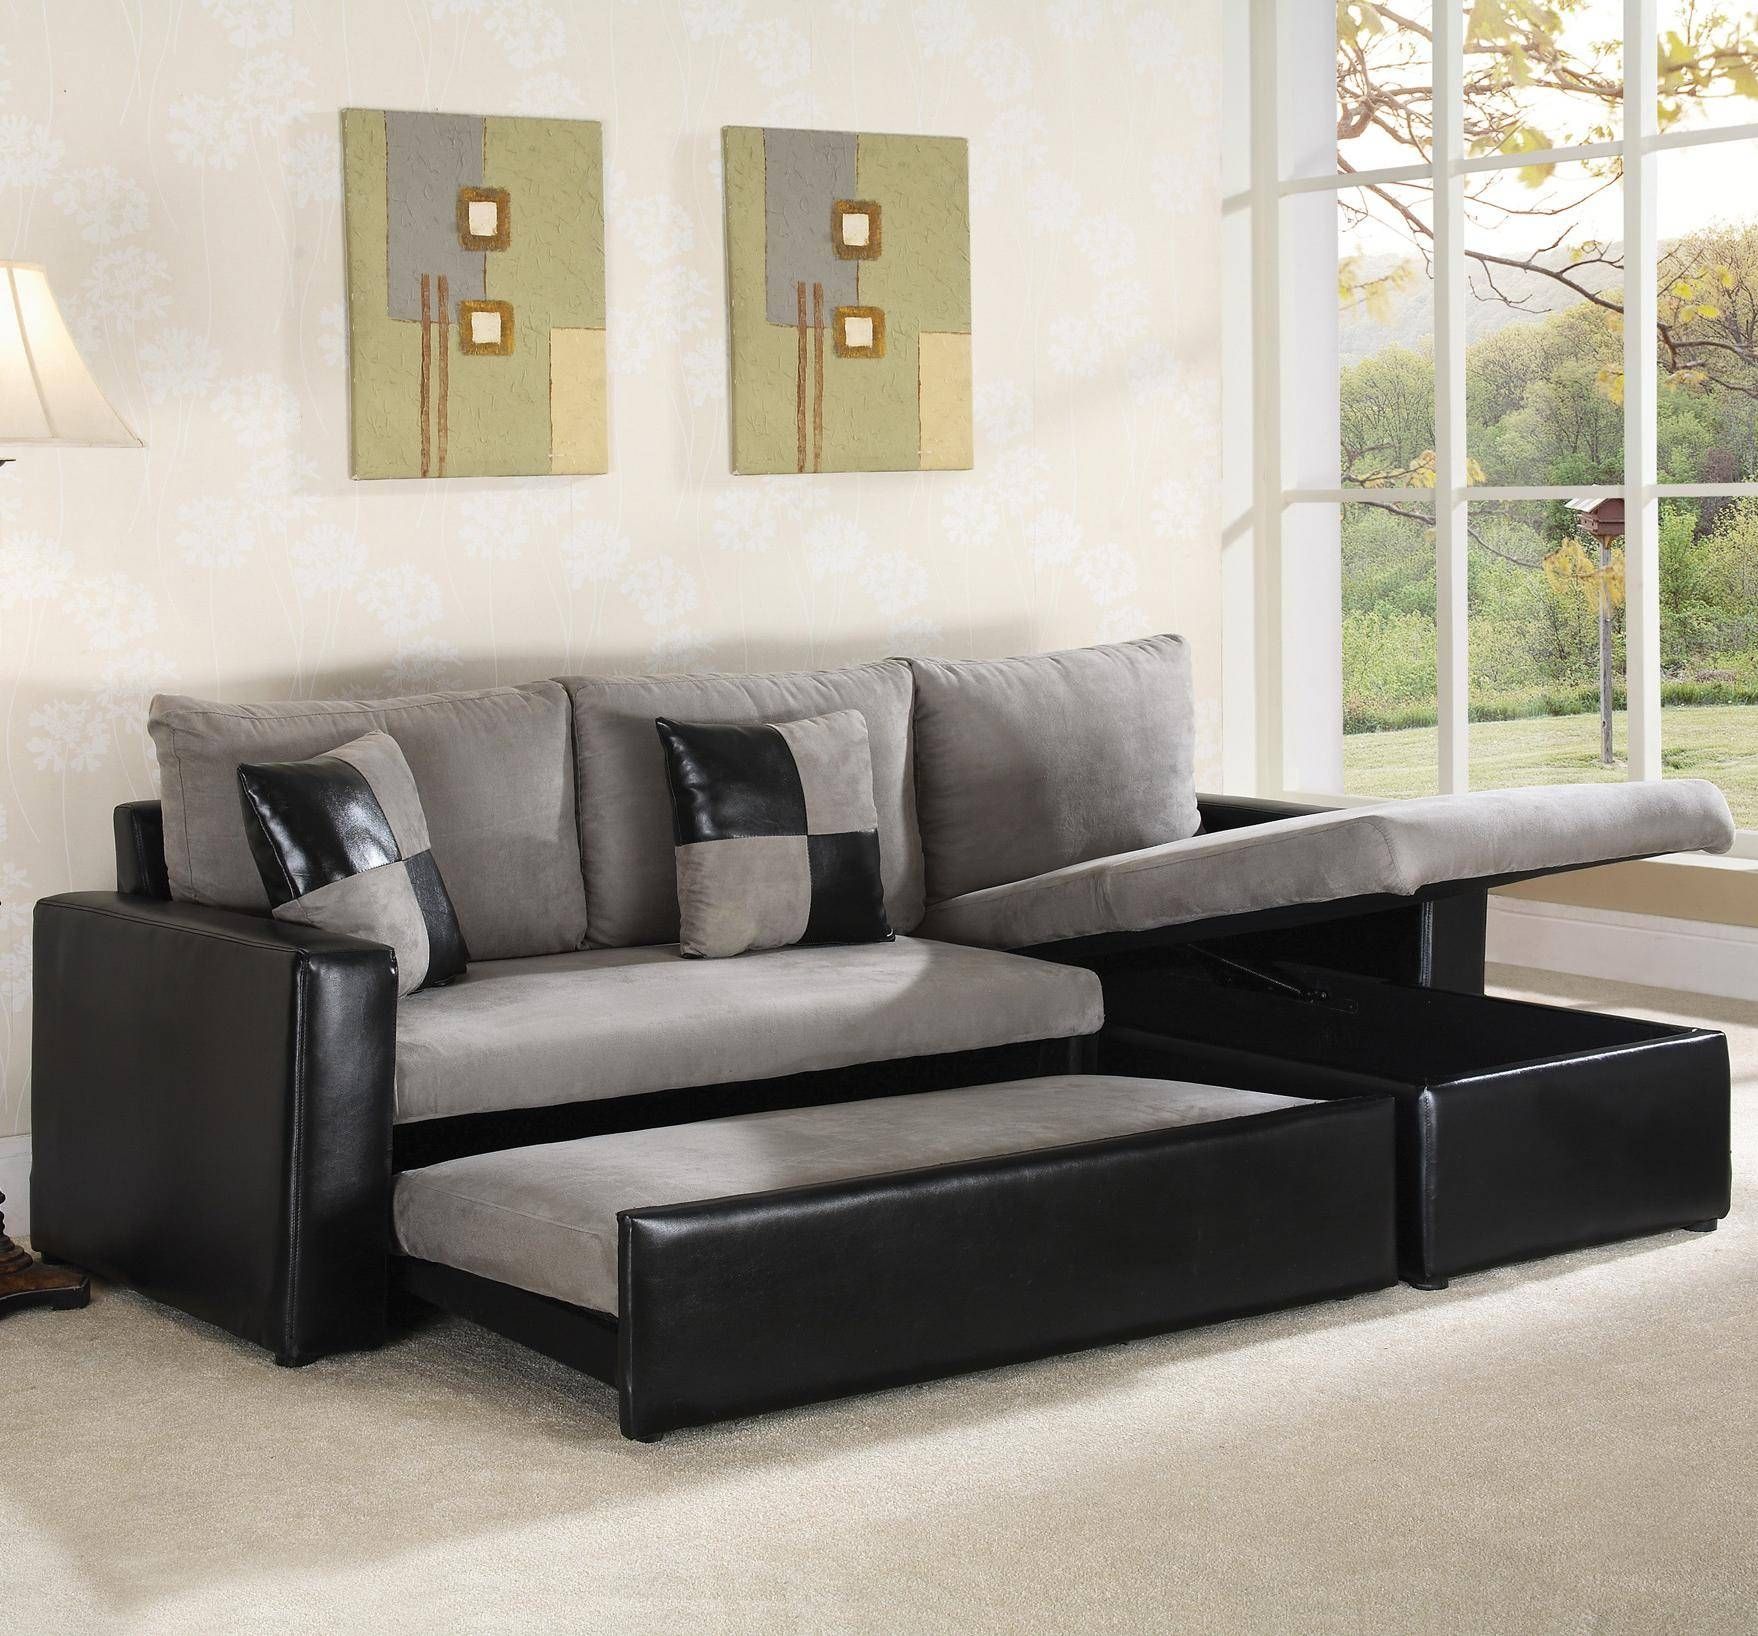 Outstanding Small Black Leather Sectional Sofa 97 On 6 Piece For 6 Piece Modular Sectional Sofa (View 27 of 30)